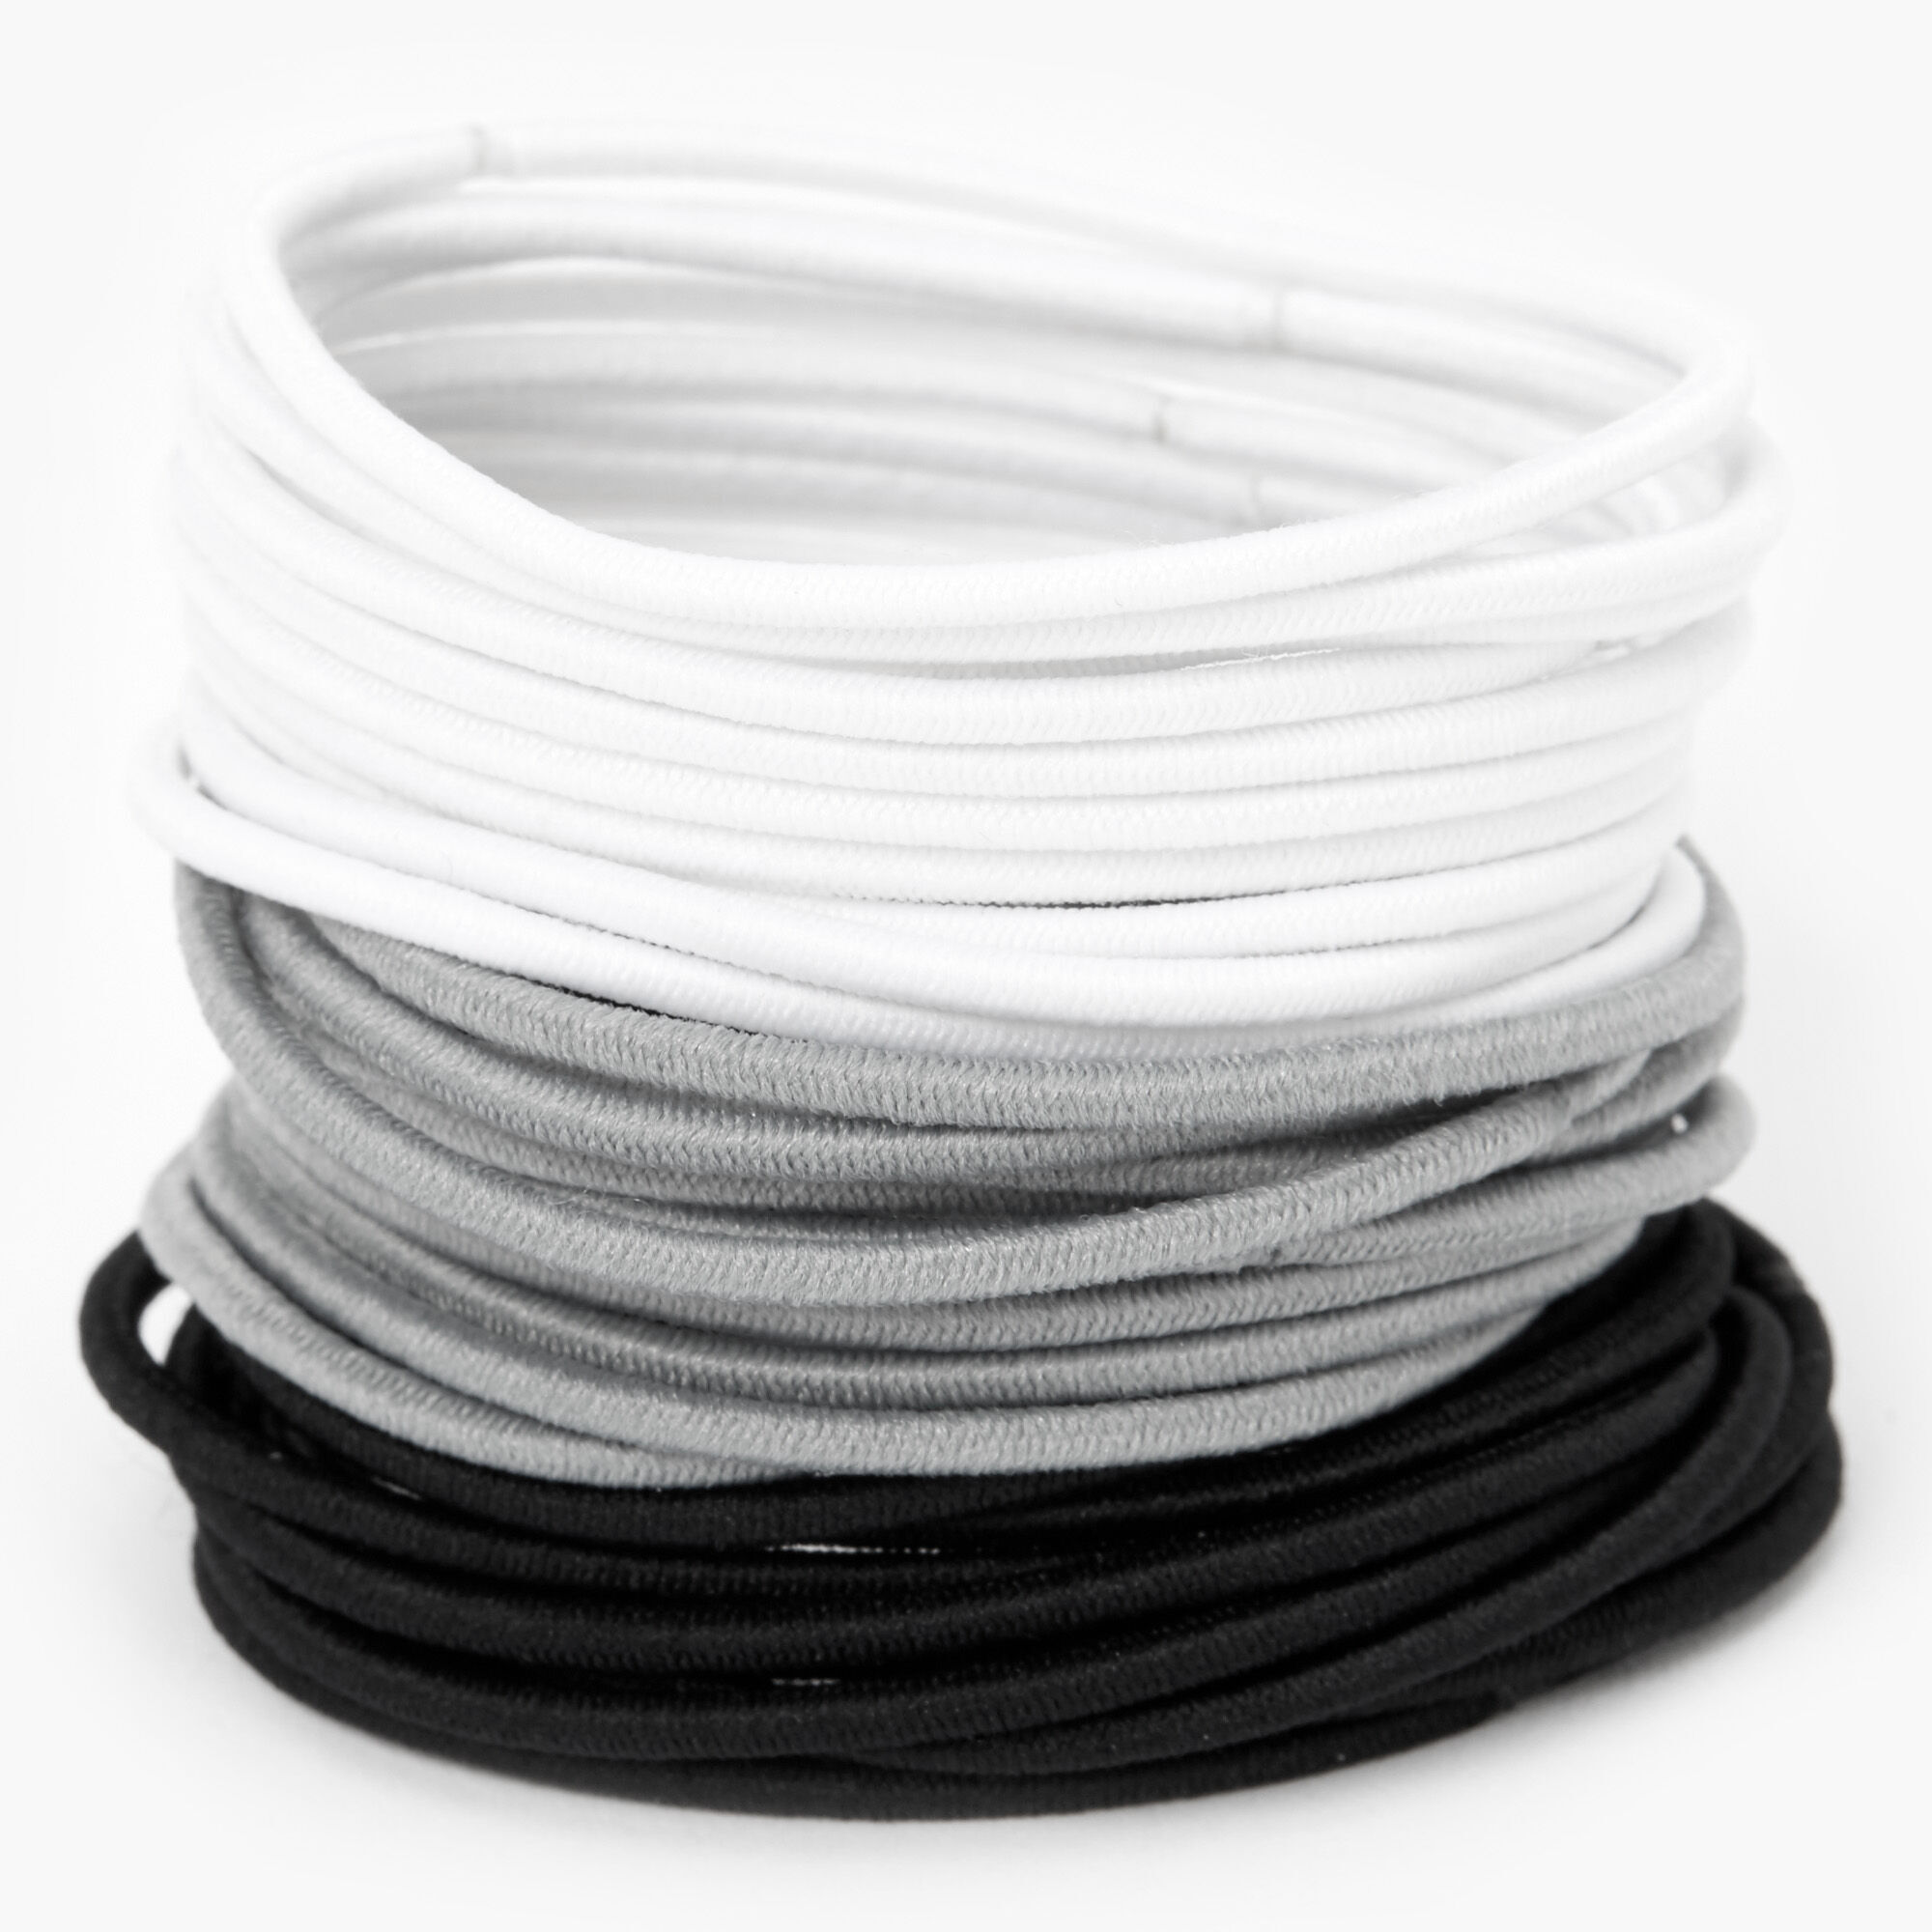 View Claires Black Grey Hair Ties 30 Pack White information